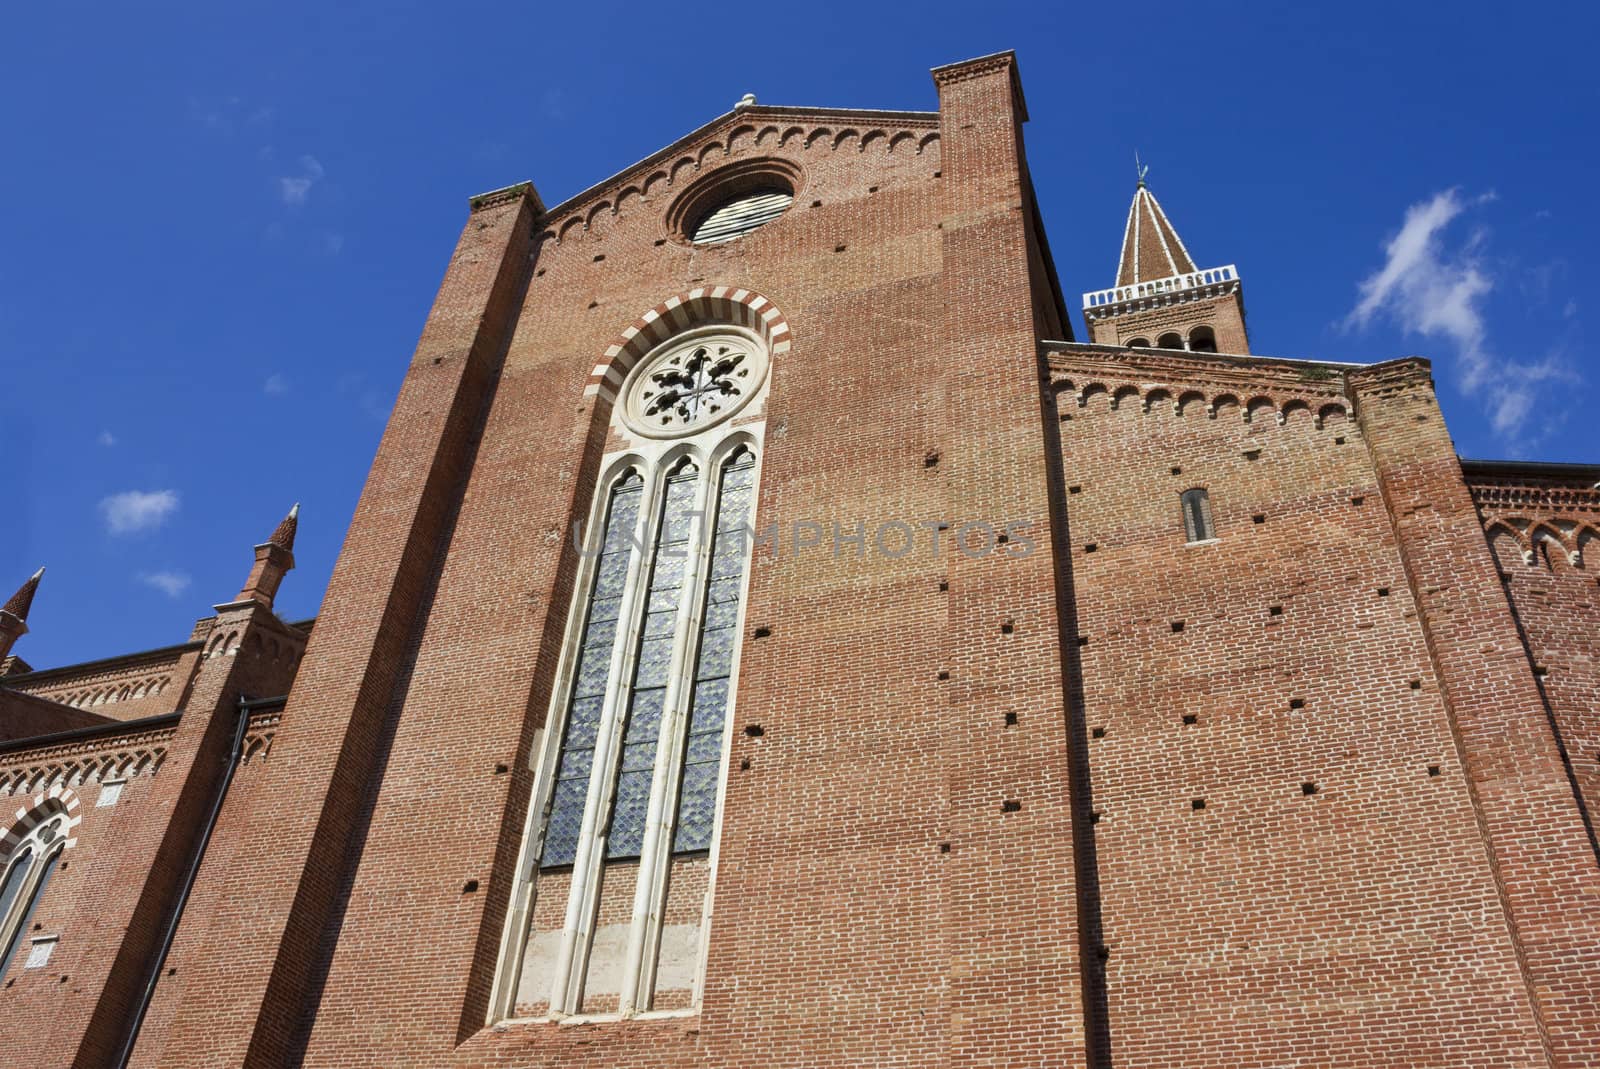 Red brick facade of the Dominican church of Sant'Anastasia in Verona, Italy in a bright sunny day, over a blue sky.